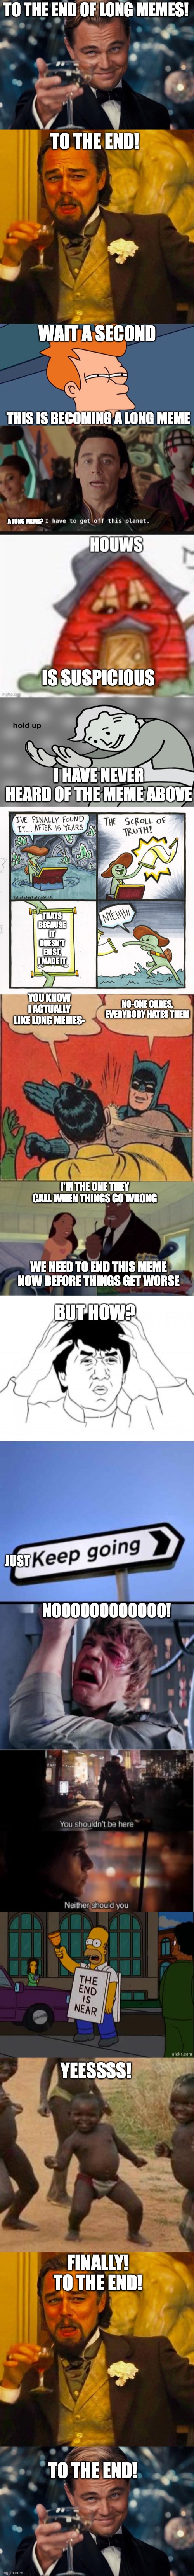 Long, srsly long | TO THE END OF LONG MEMES! TO THE END! WAIT A SECOND; THIS IS BECOMING A LONG MEME; A LONG MEME? IS SUSPICIOUS; I HAVE NEVER HEARD OF THE MEME ABOVE; THATS BECAUSE IT DOESN'T EXIST, I MADE IT; YOU KNOW I ACTUALLY LIKE LONG MEMES-; NO-ONE CARES, EVERYBODY HATES THEM; I'M THE ONE THEY CALL WHEN THINGS GO WRONG; WE NEED TO END THIS MEME NOW BEFORE THINGS GET WORSE; BUT HOW? NOOOOOOOOOOOO! JUST; YEESSSS! FINALLY! TO THE END! TO THE END! | image tagged in memes | made w/ Imgflip meme maker